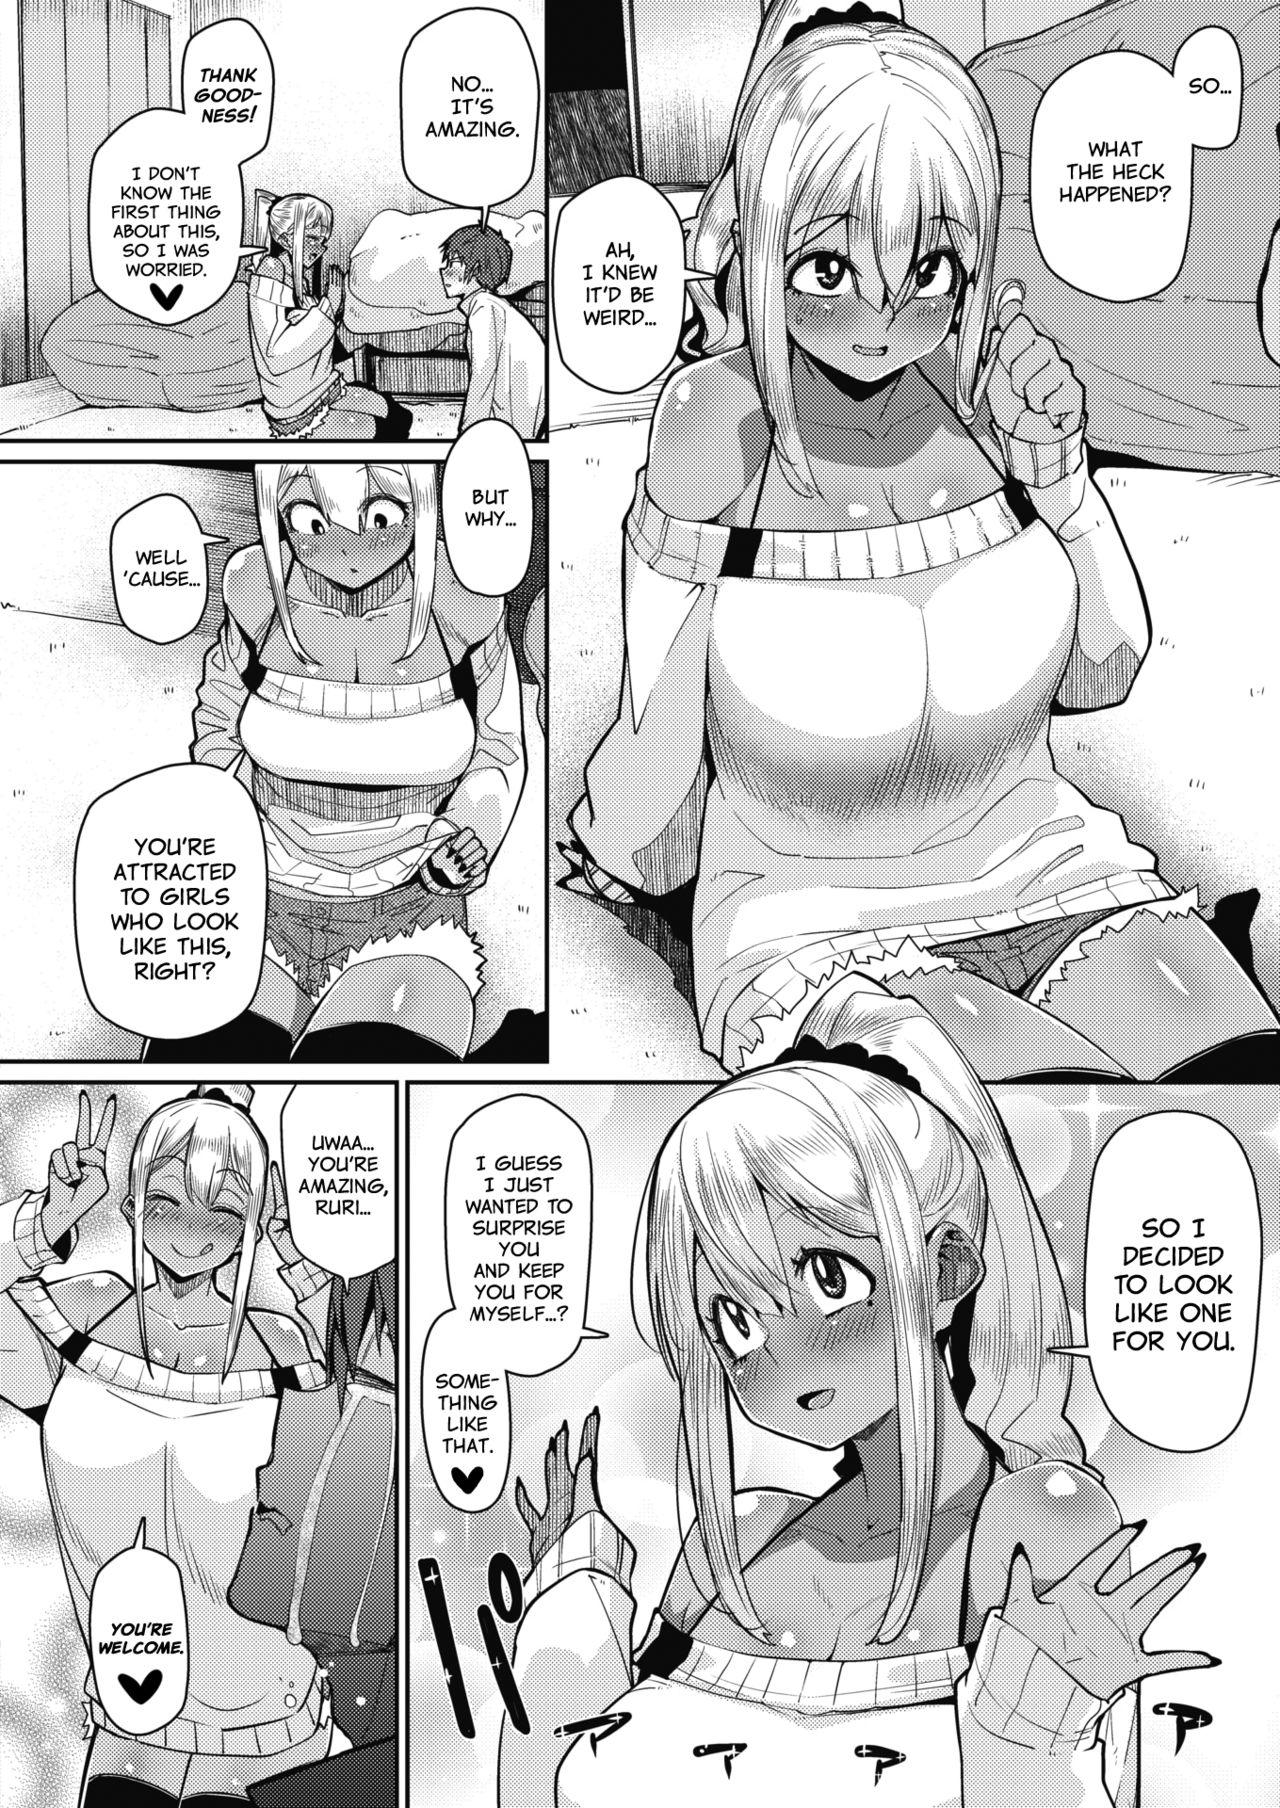 Twerking Gekkan "The Bitch" o Mita Onna no Hannou ni Tsuite | About the Reaction of the Girl Who Saw "The Bitch Monthly" Big Tits - Page 4